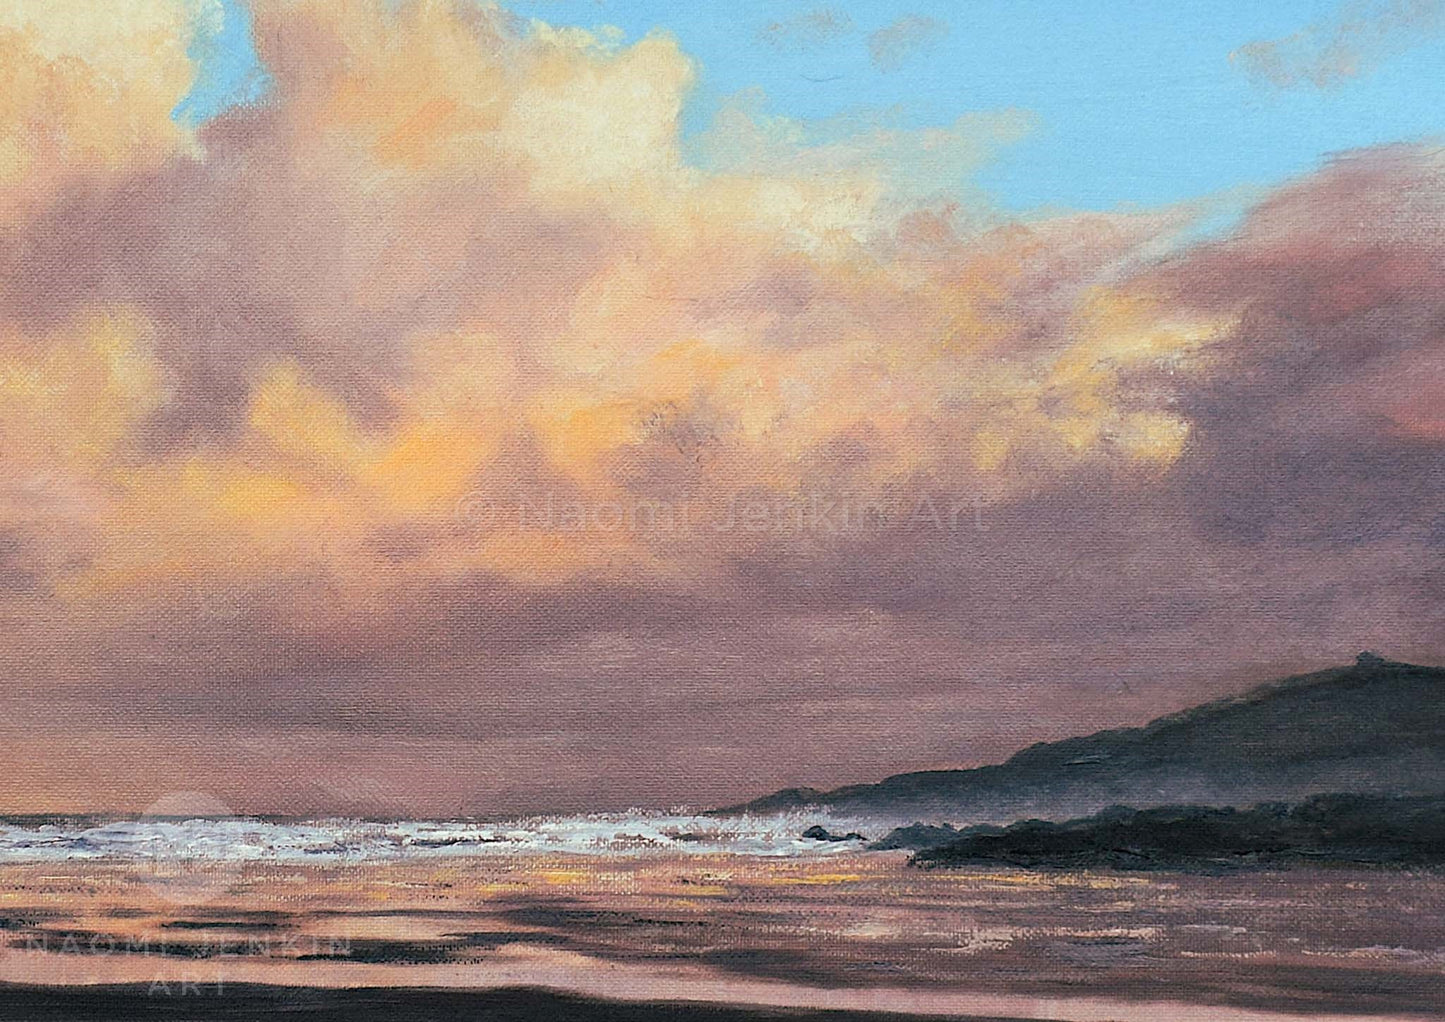 Close up of a seascape painting by Naomi Jenkin Art. 